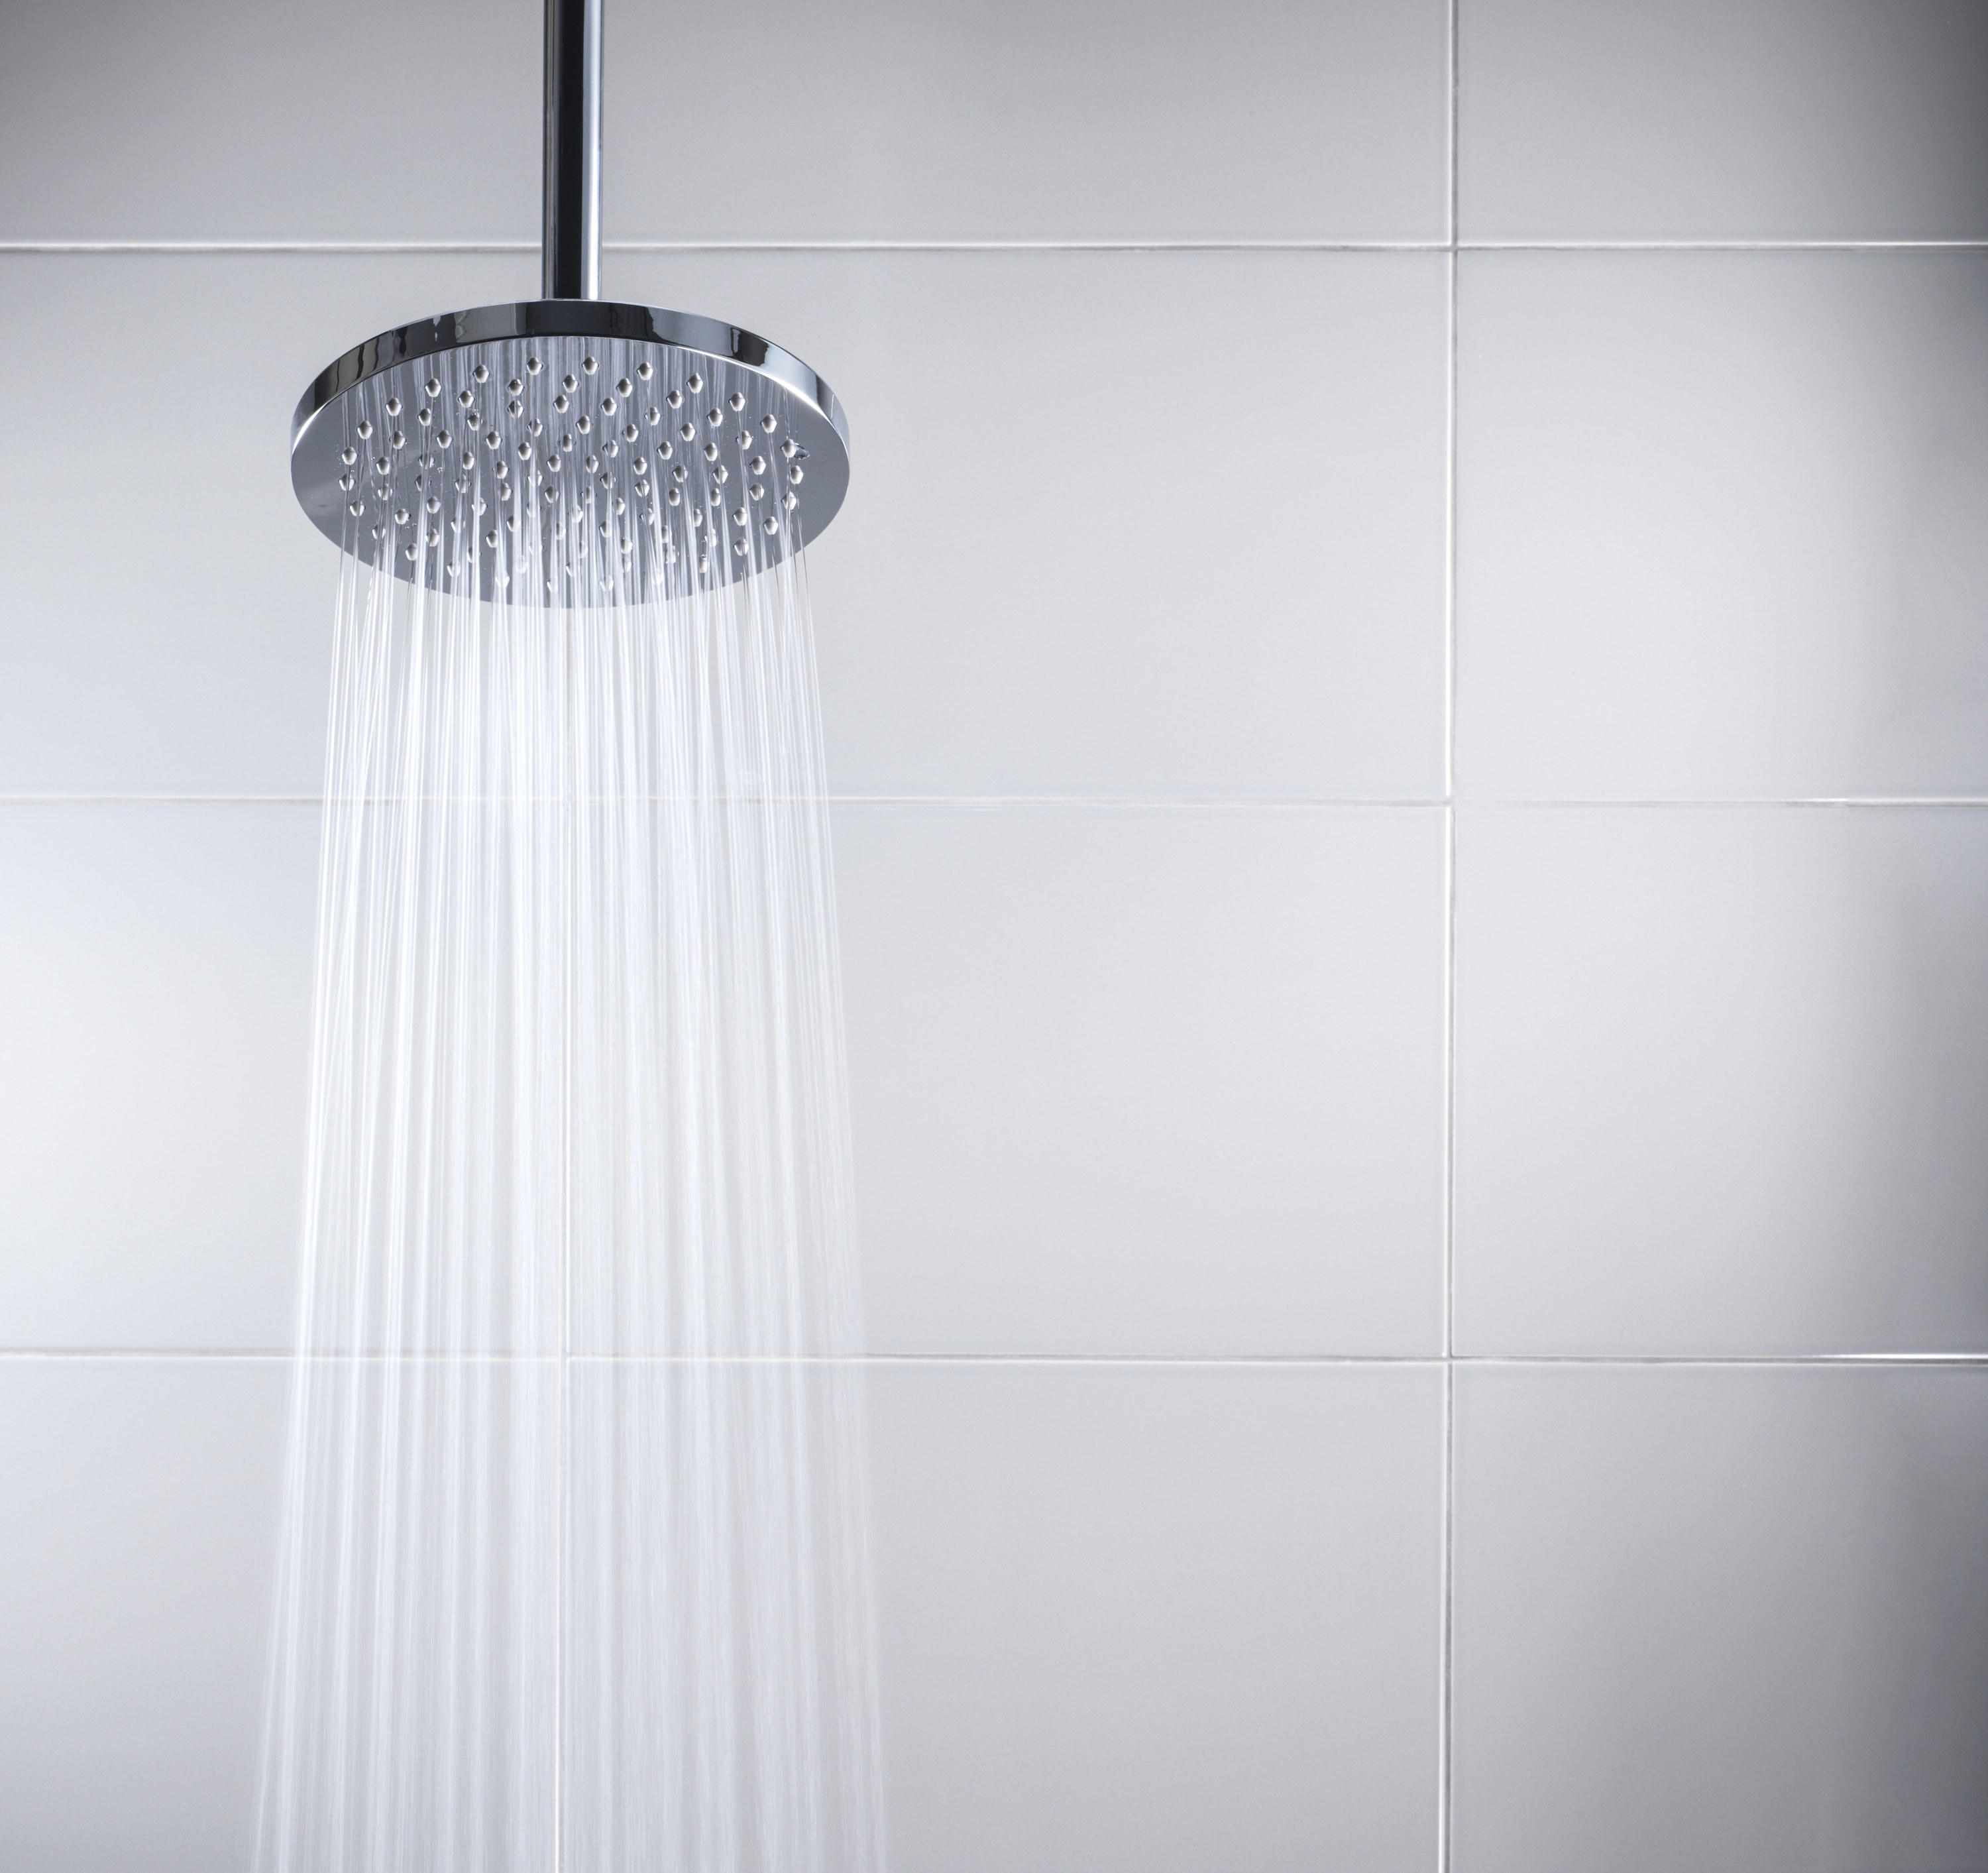 Water running from a shower head in a white tiled shower